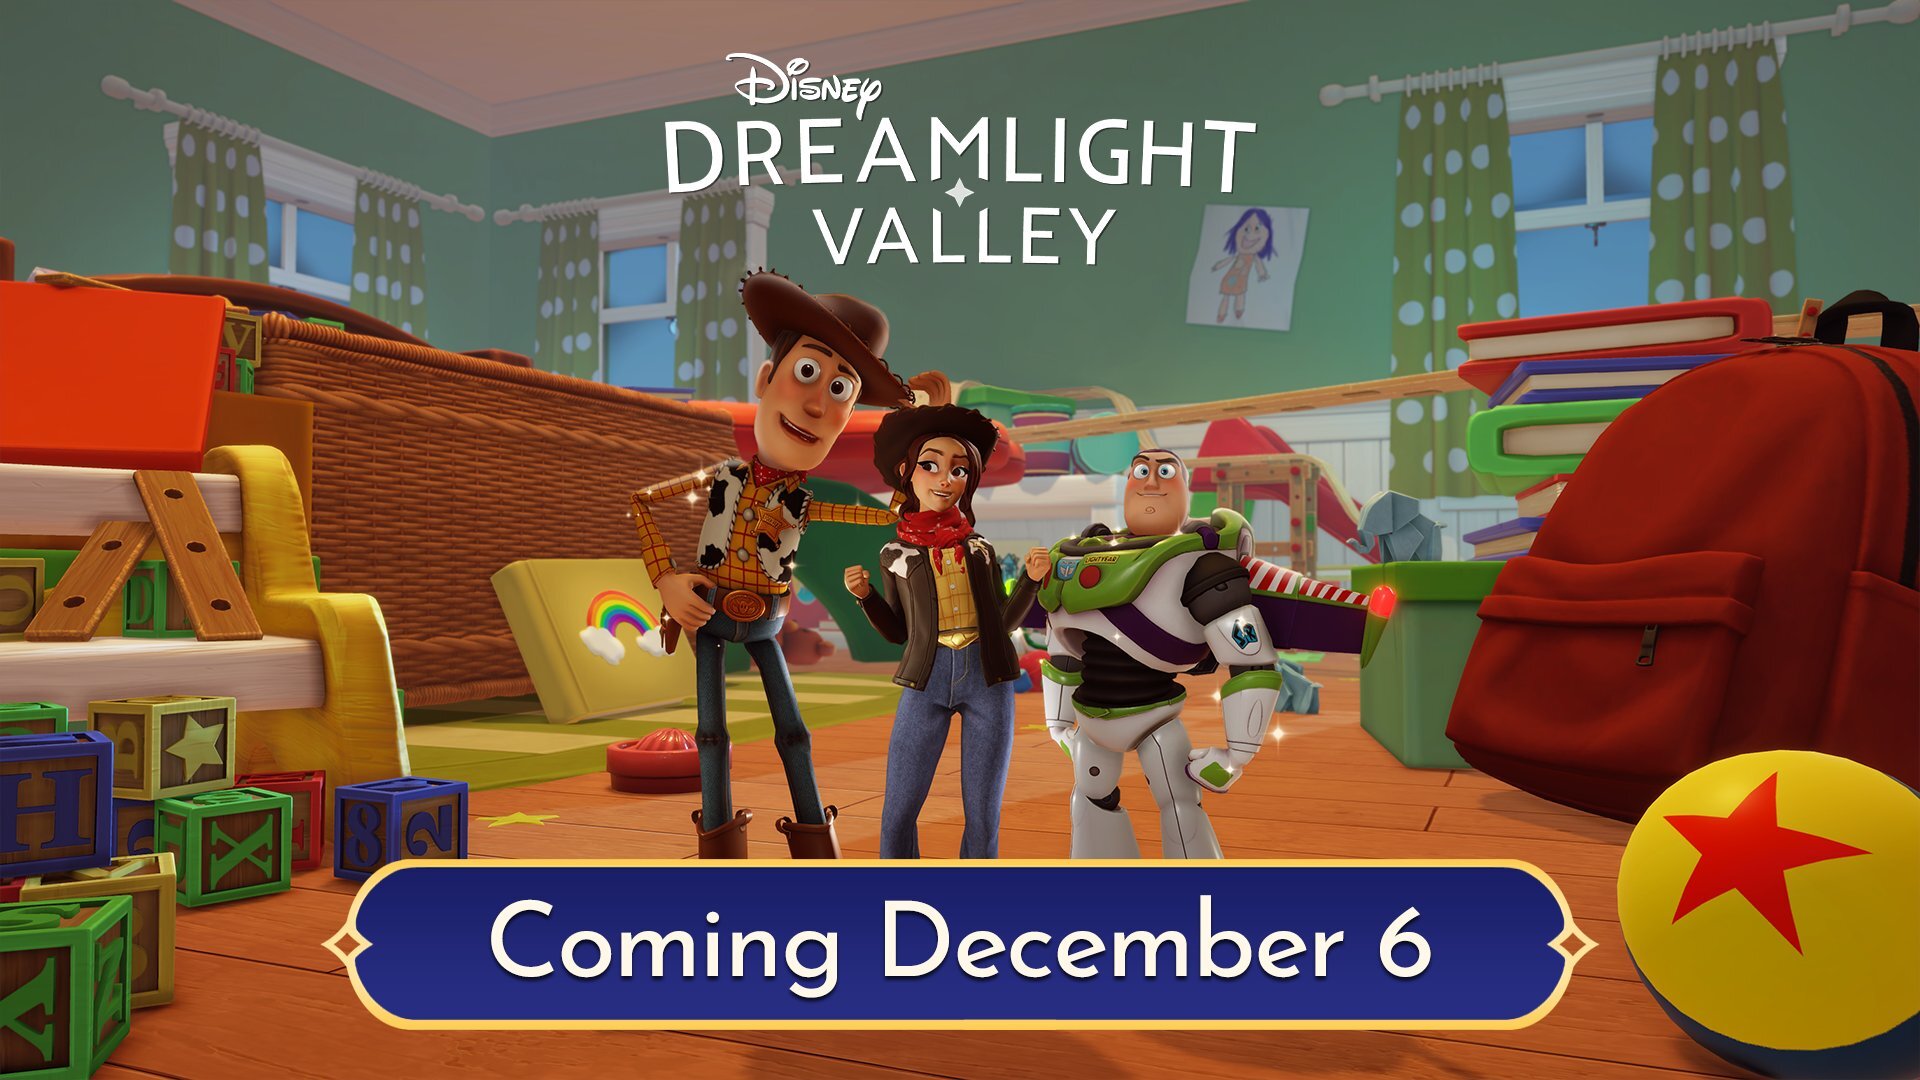 A screenshot from Disney Dreamlight Valley showing Woody and Buzzy with the player-character in a bedroom,